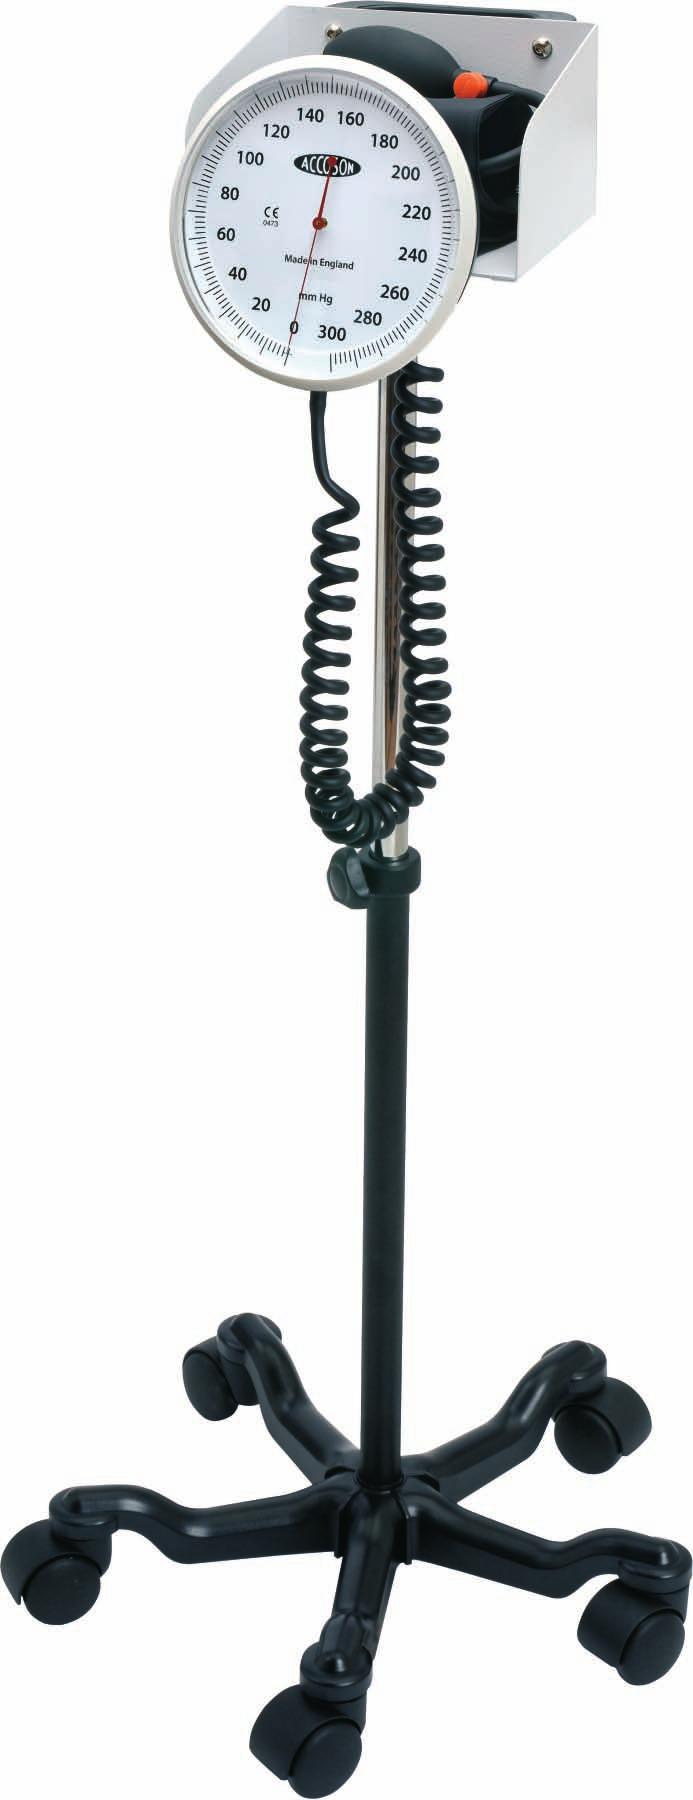 system with coiled tubing Stand model Code: 0362 Adjustable height with inclined